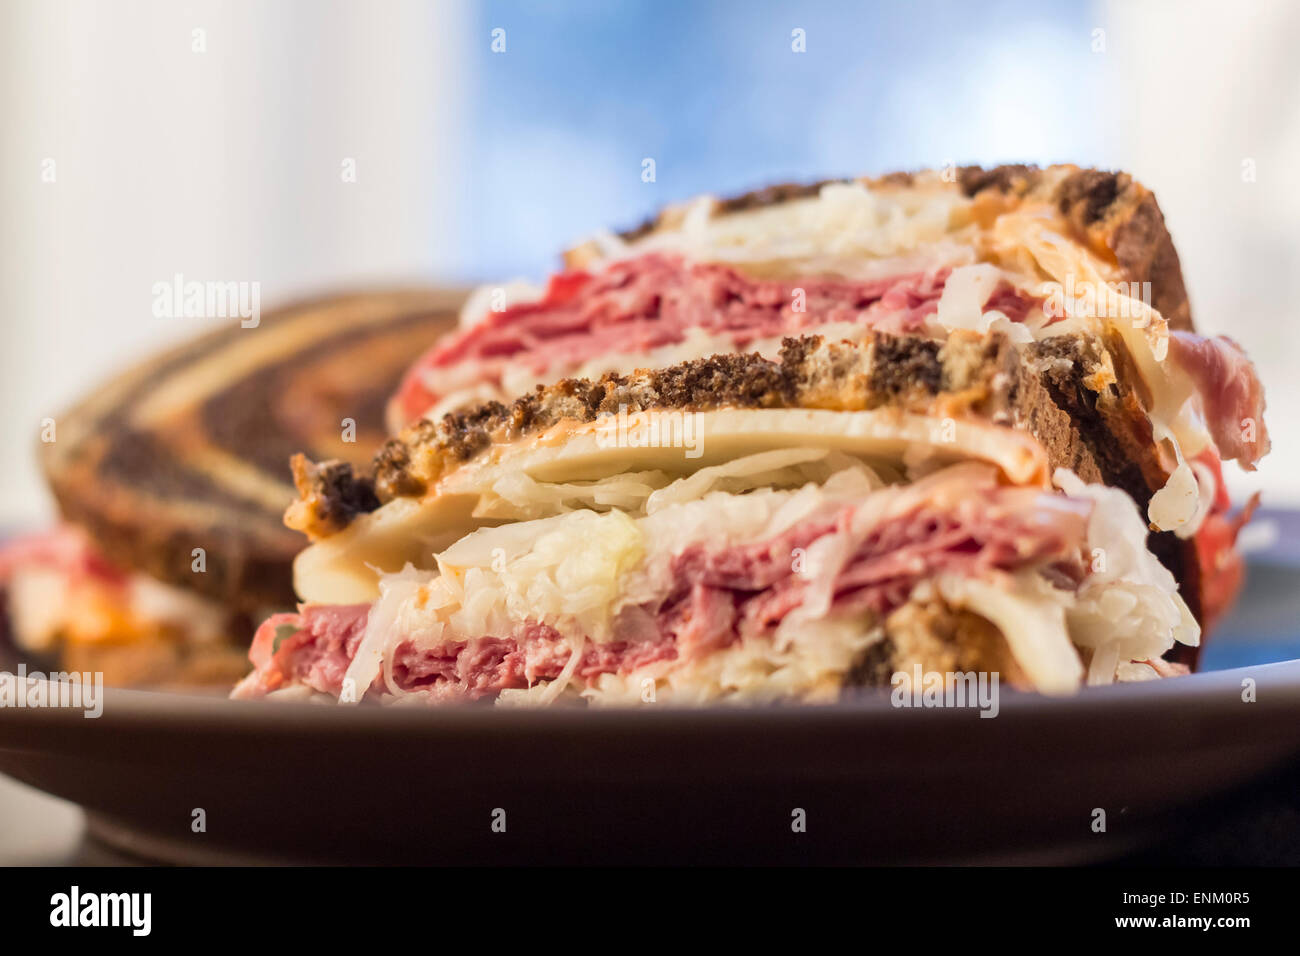 Classic reuben sandwich on pumpernickel swirl rye bread. A hearty meal with a side of pickle and chips Stock Photo